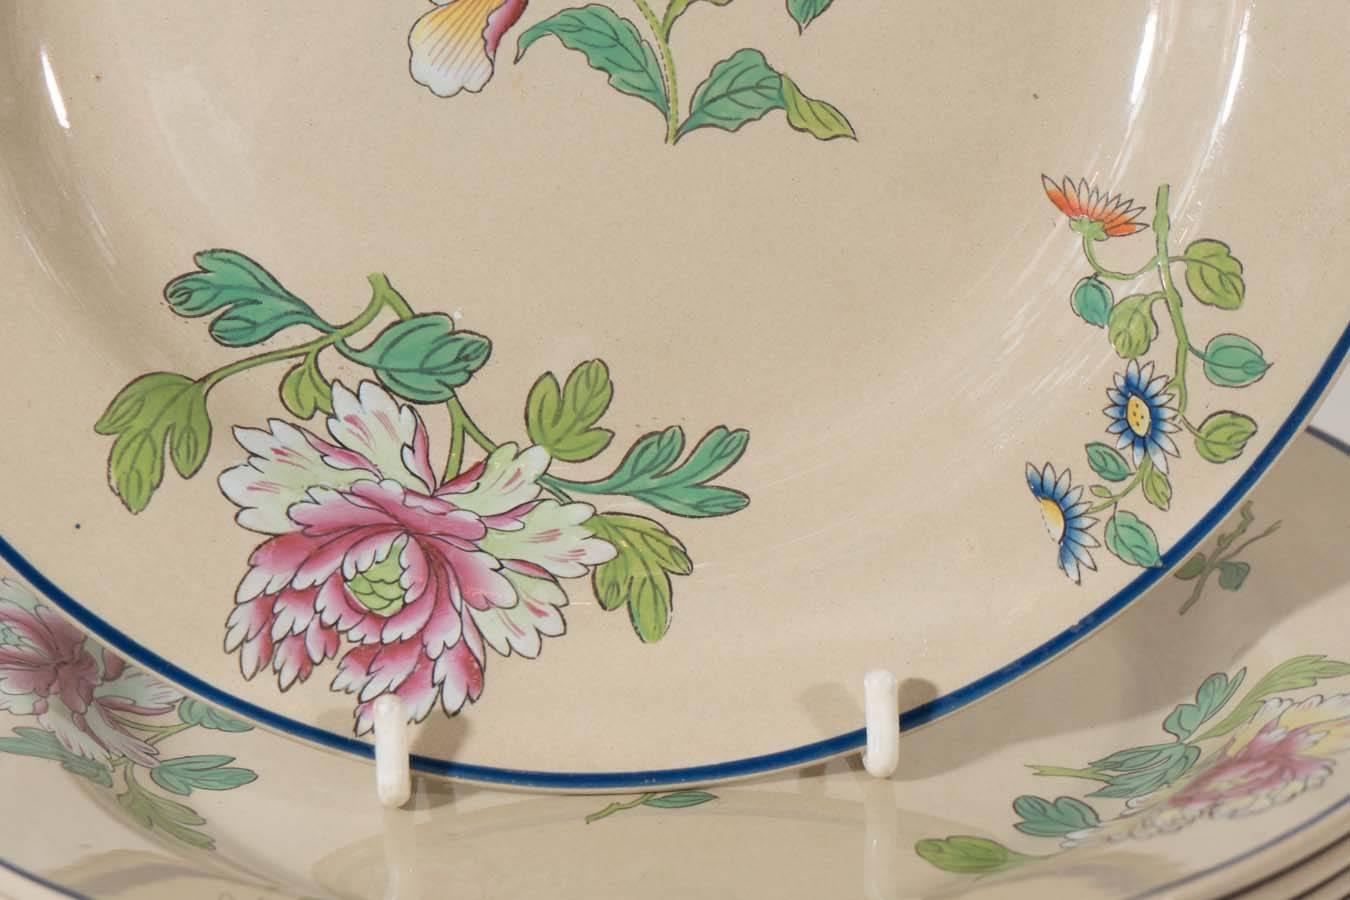 English Set of Ten Wedgwood Drabware Dishes Painted with Enamel Flowers